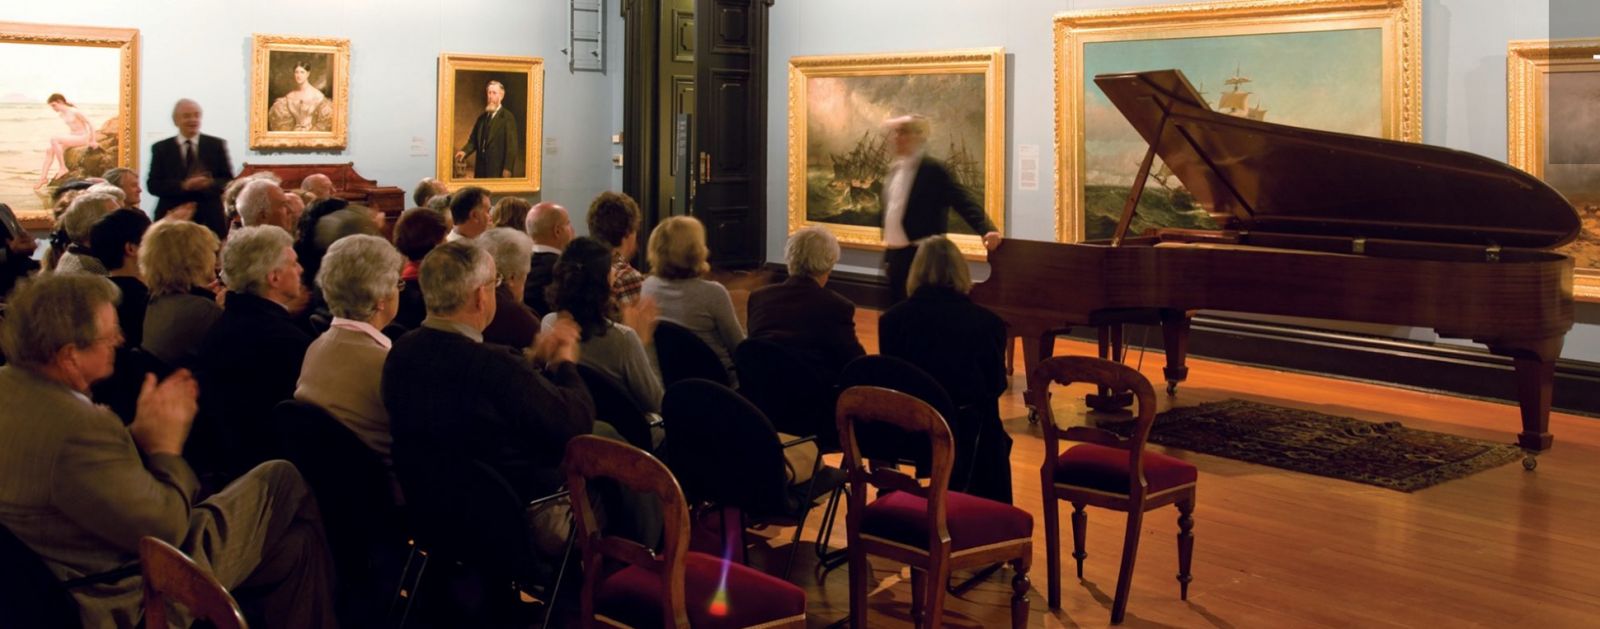 Concert at the Gallery image with permission from Peter Freund source Art Gallery of Ballarat